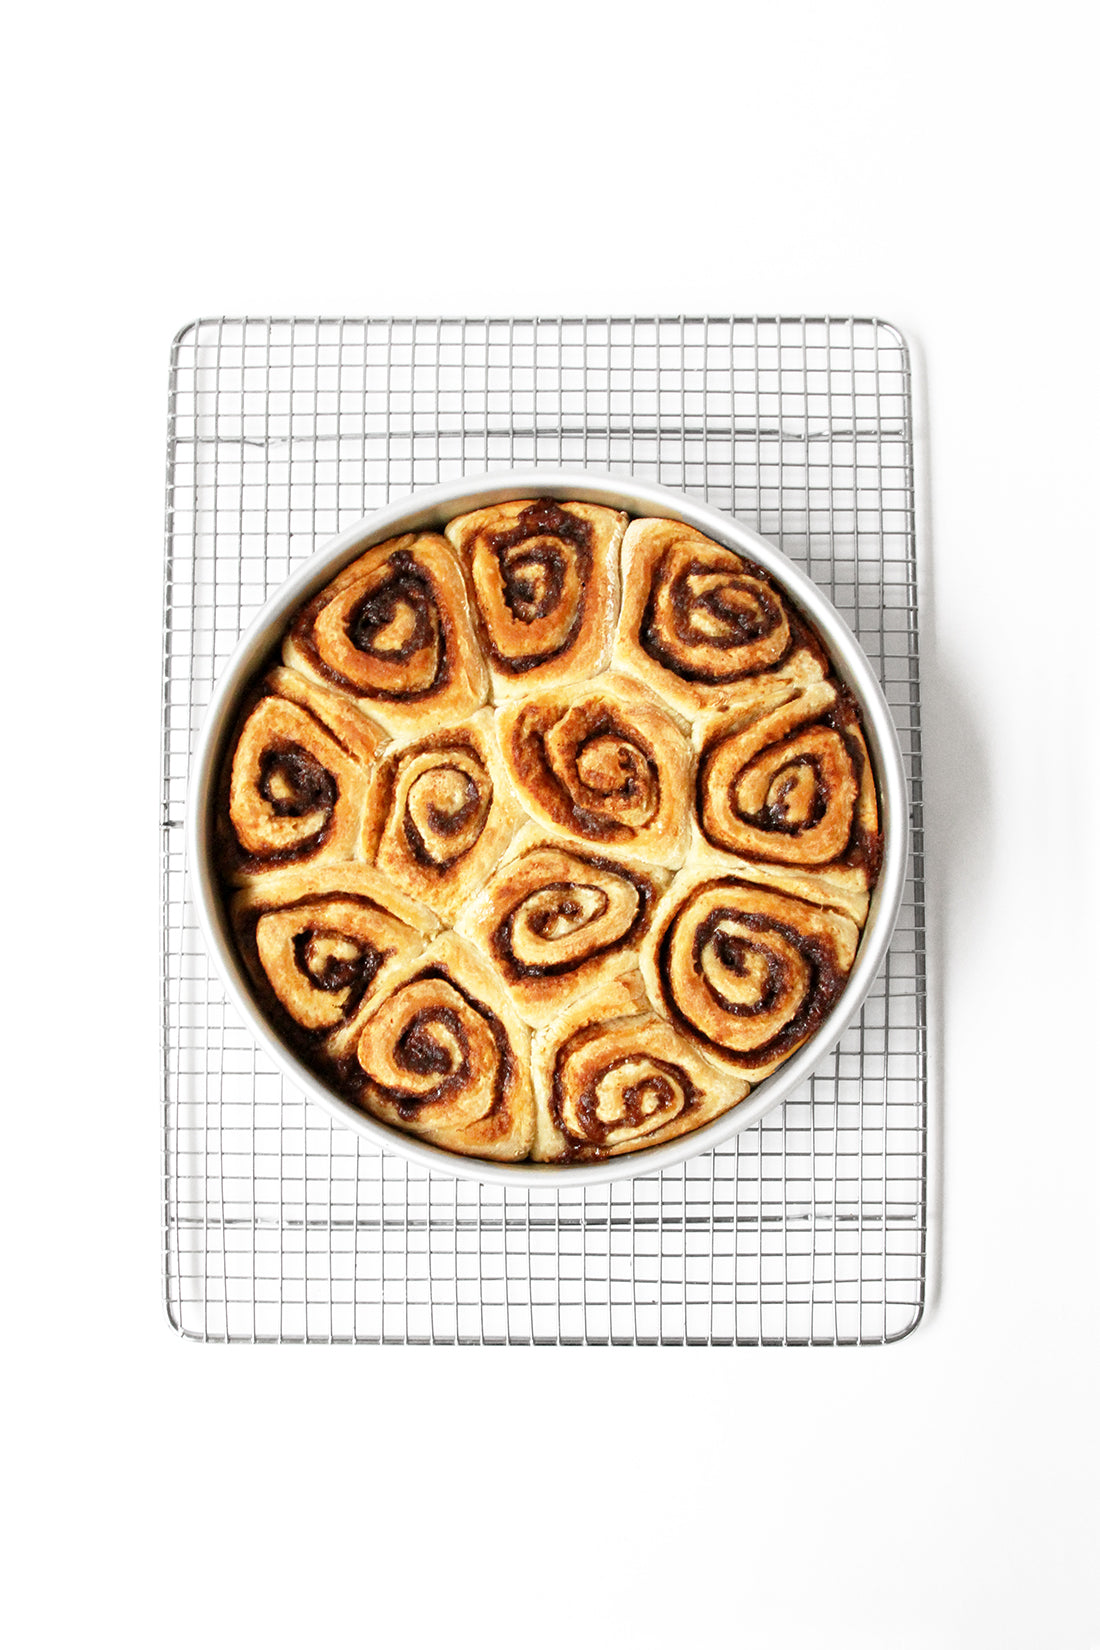 Image from above of a circular pan with twelve Miss Jones Baking Co Cake Mix Cinnamon Rolls